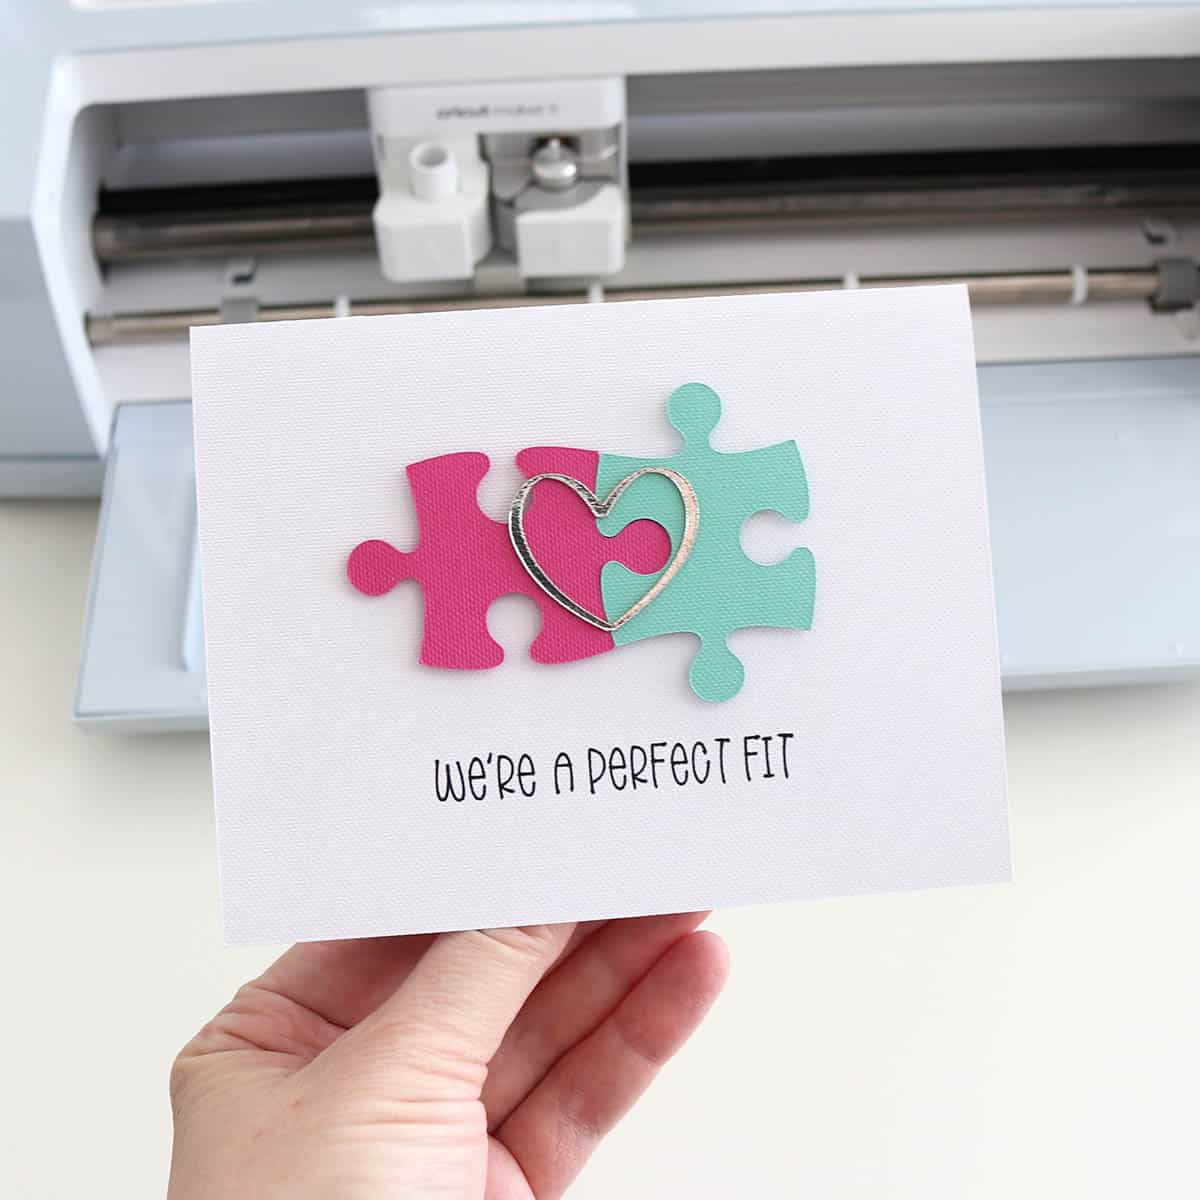 cricut valentines day card ideas: we're a perfect fit puzzle pieces Valentine's card